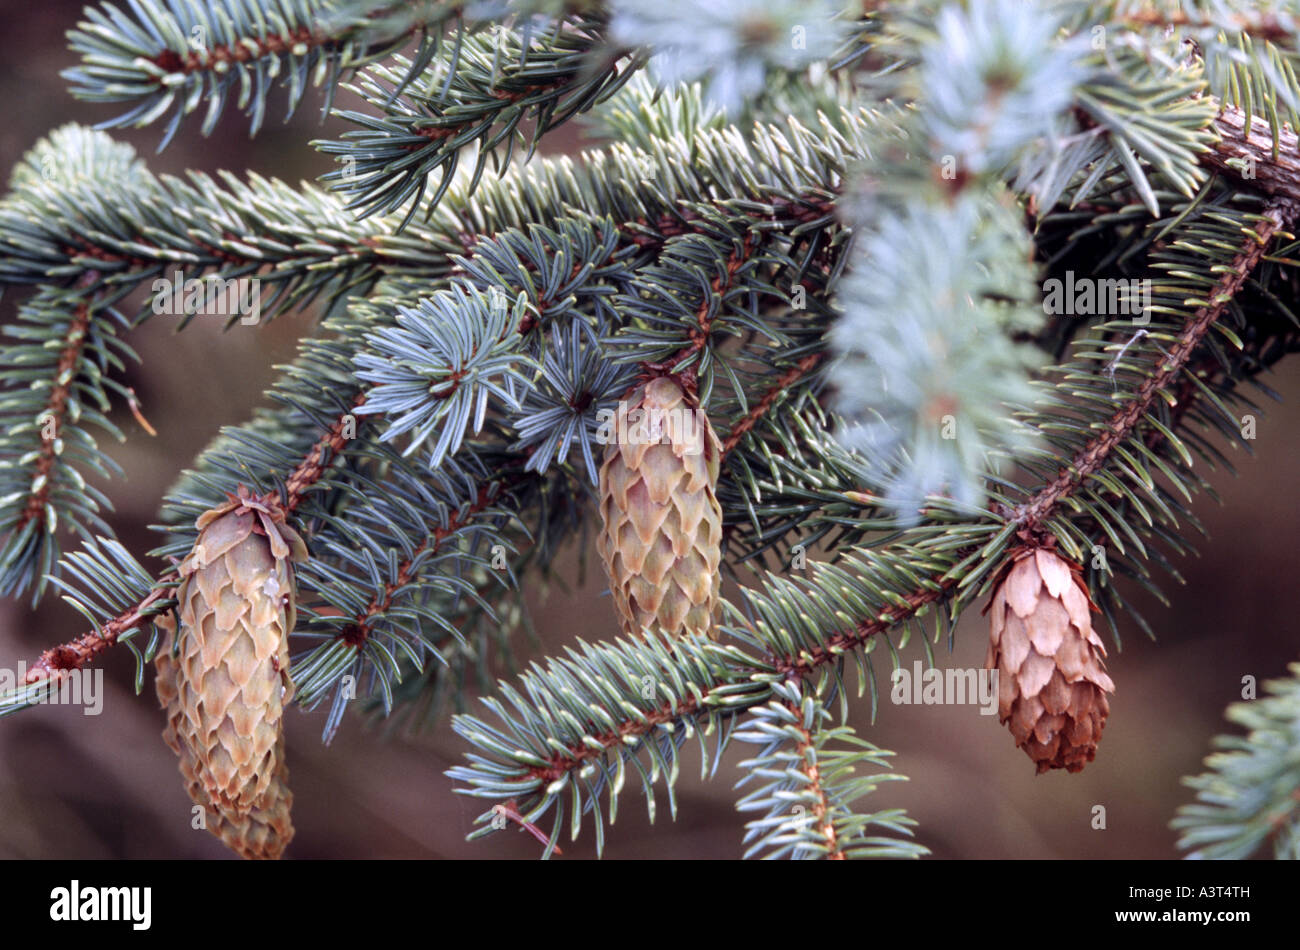 Colorado blue spruce (Picea pungens), branches with cones Stock Photo